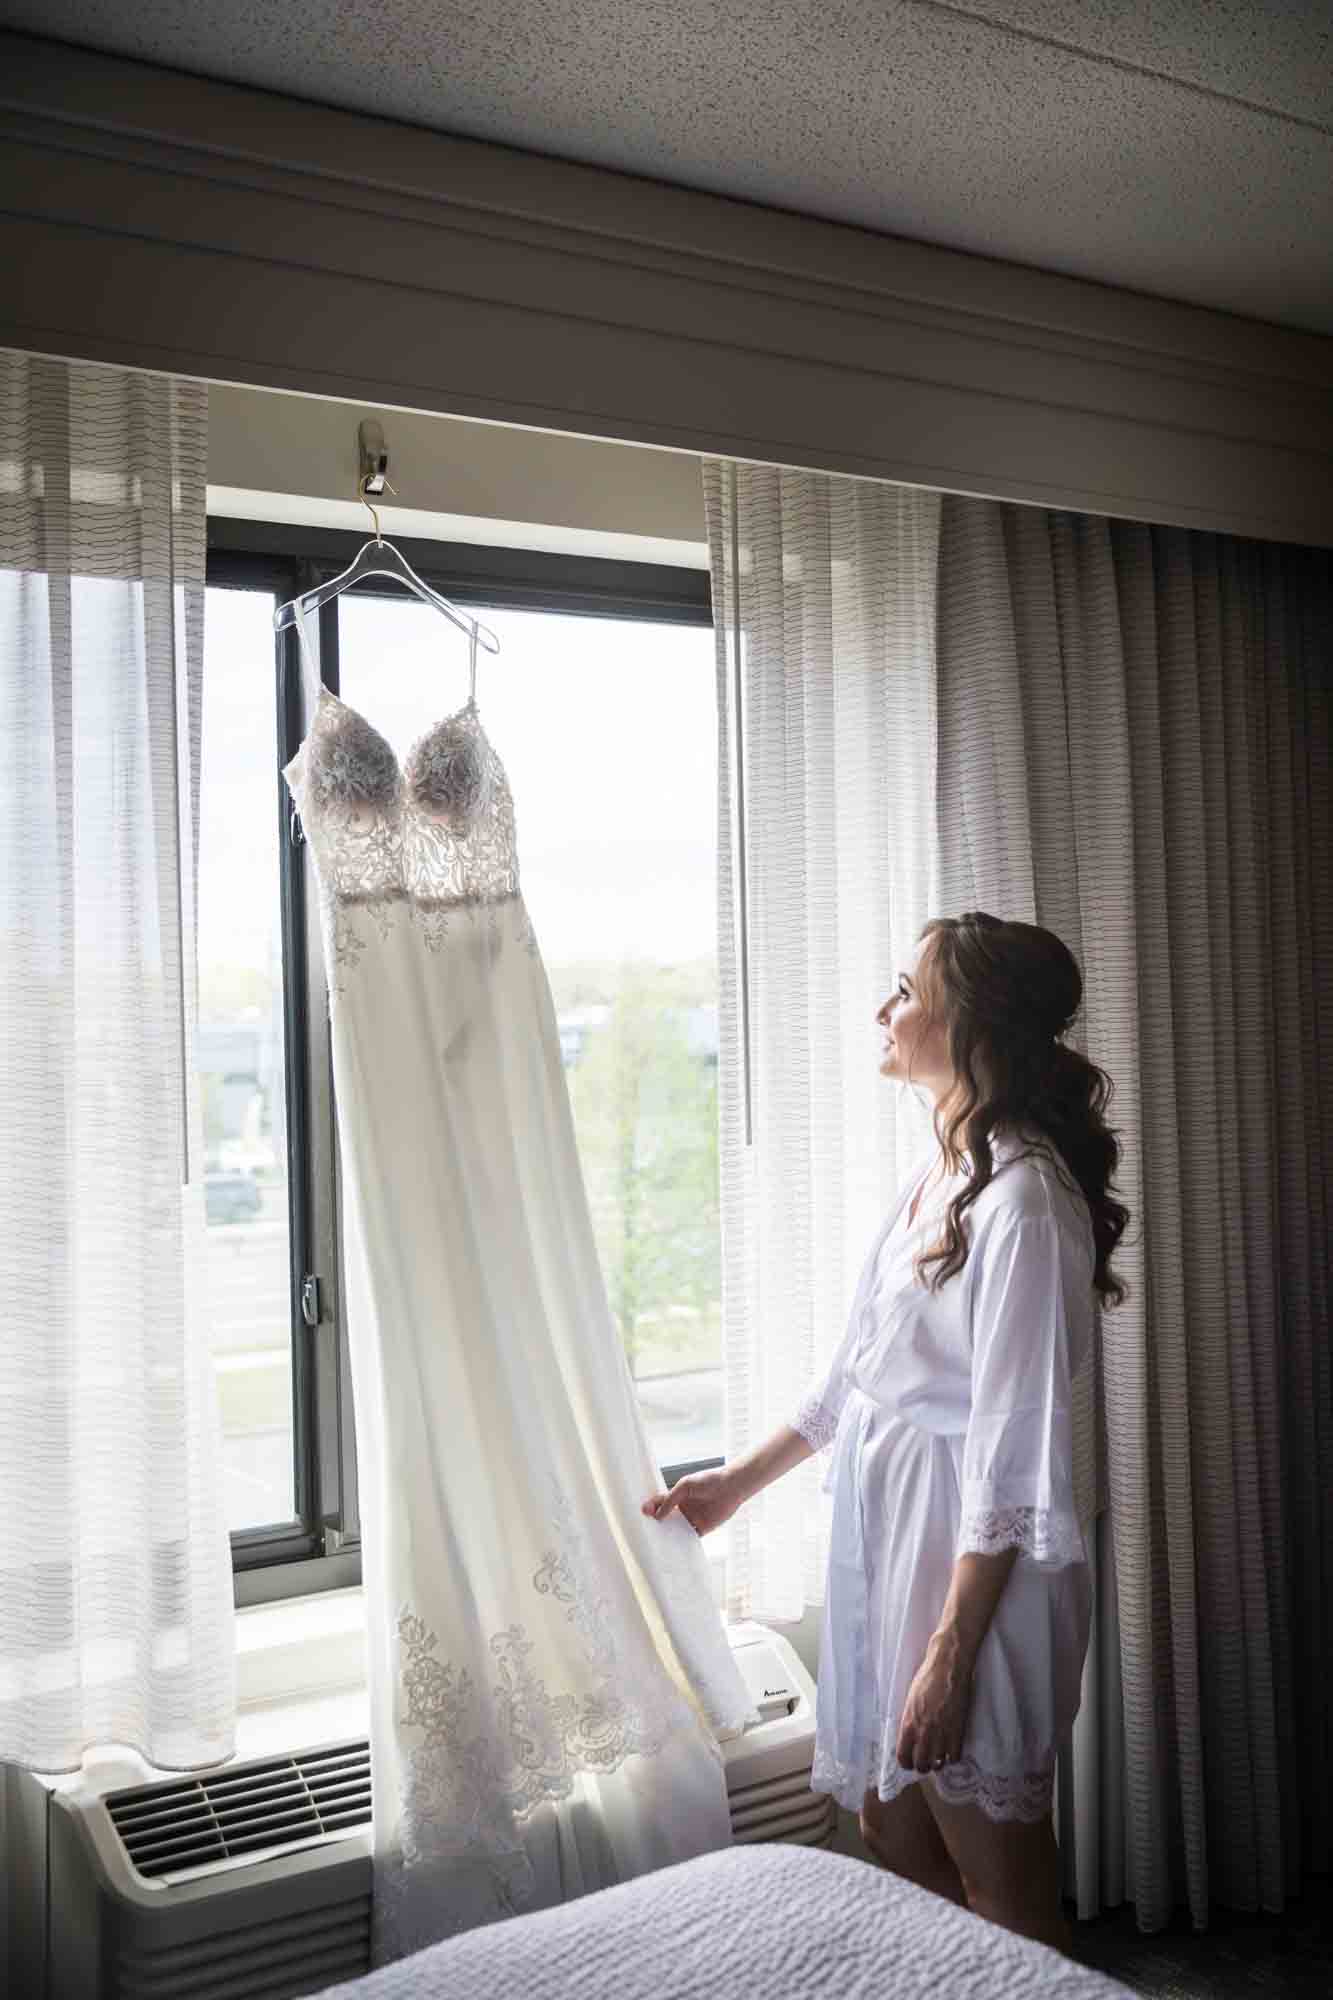 Bride looking up at wedding dress hanging on window